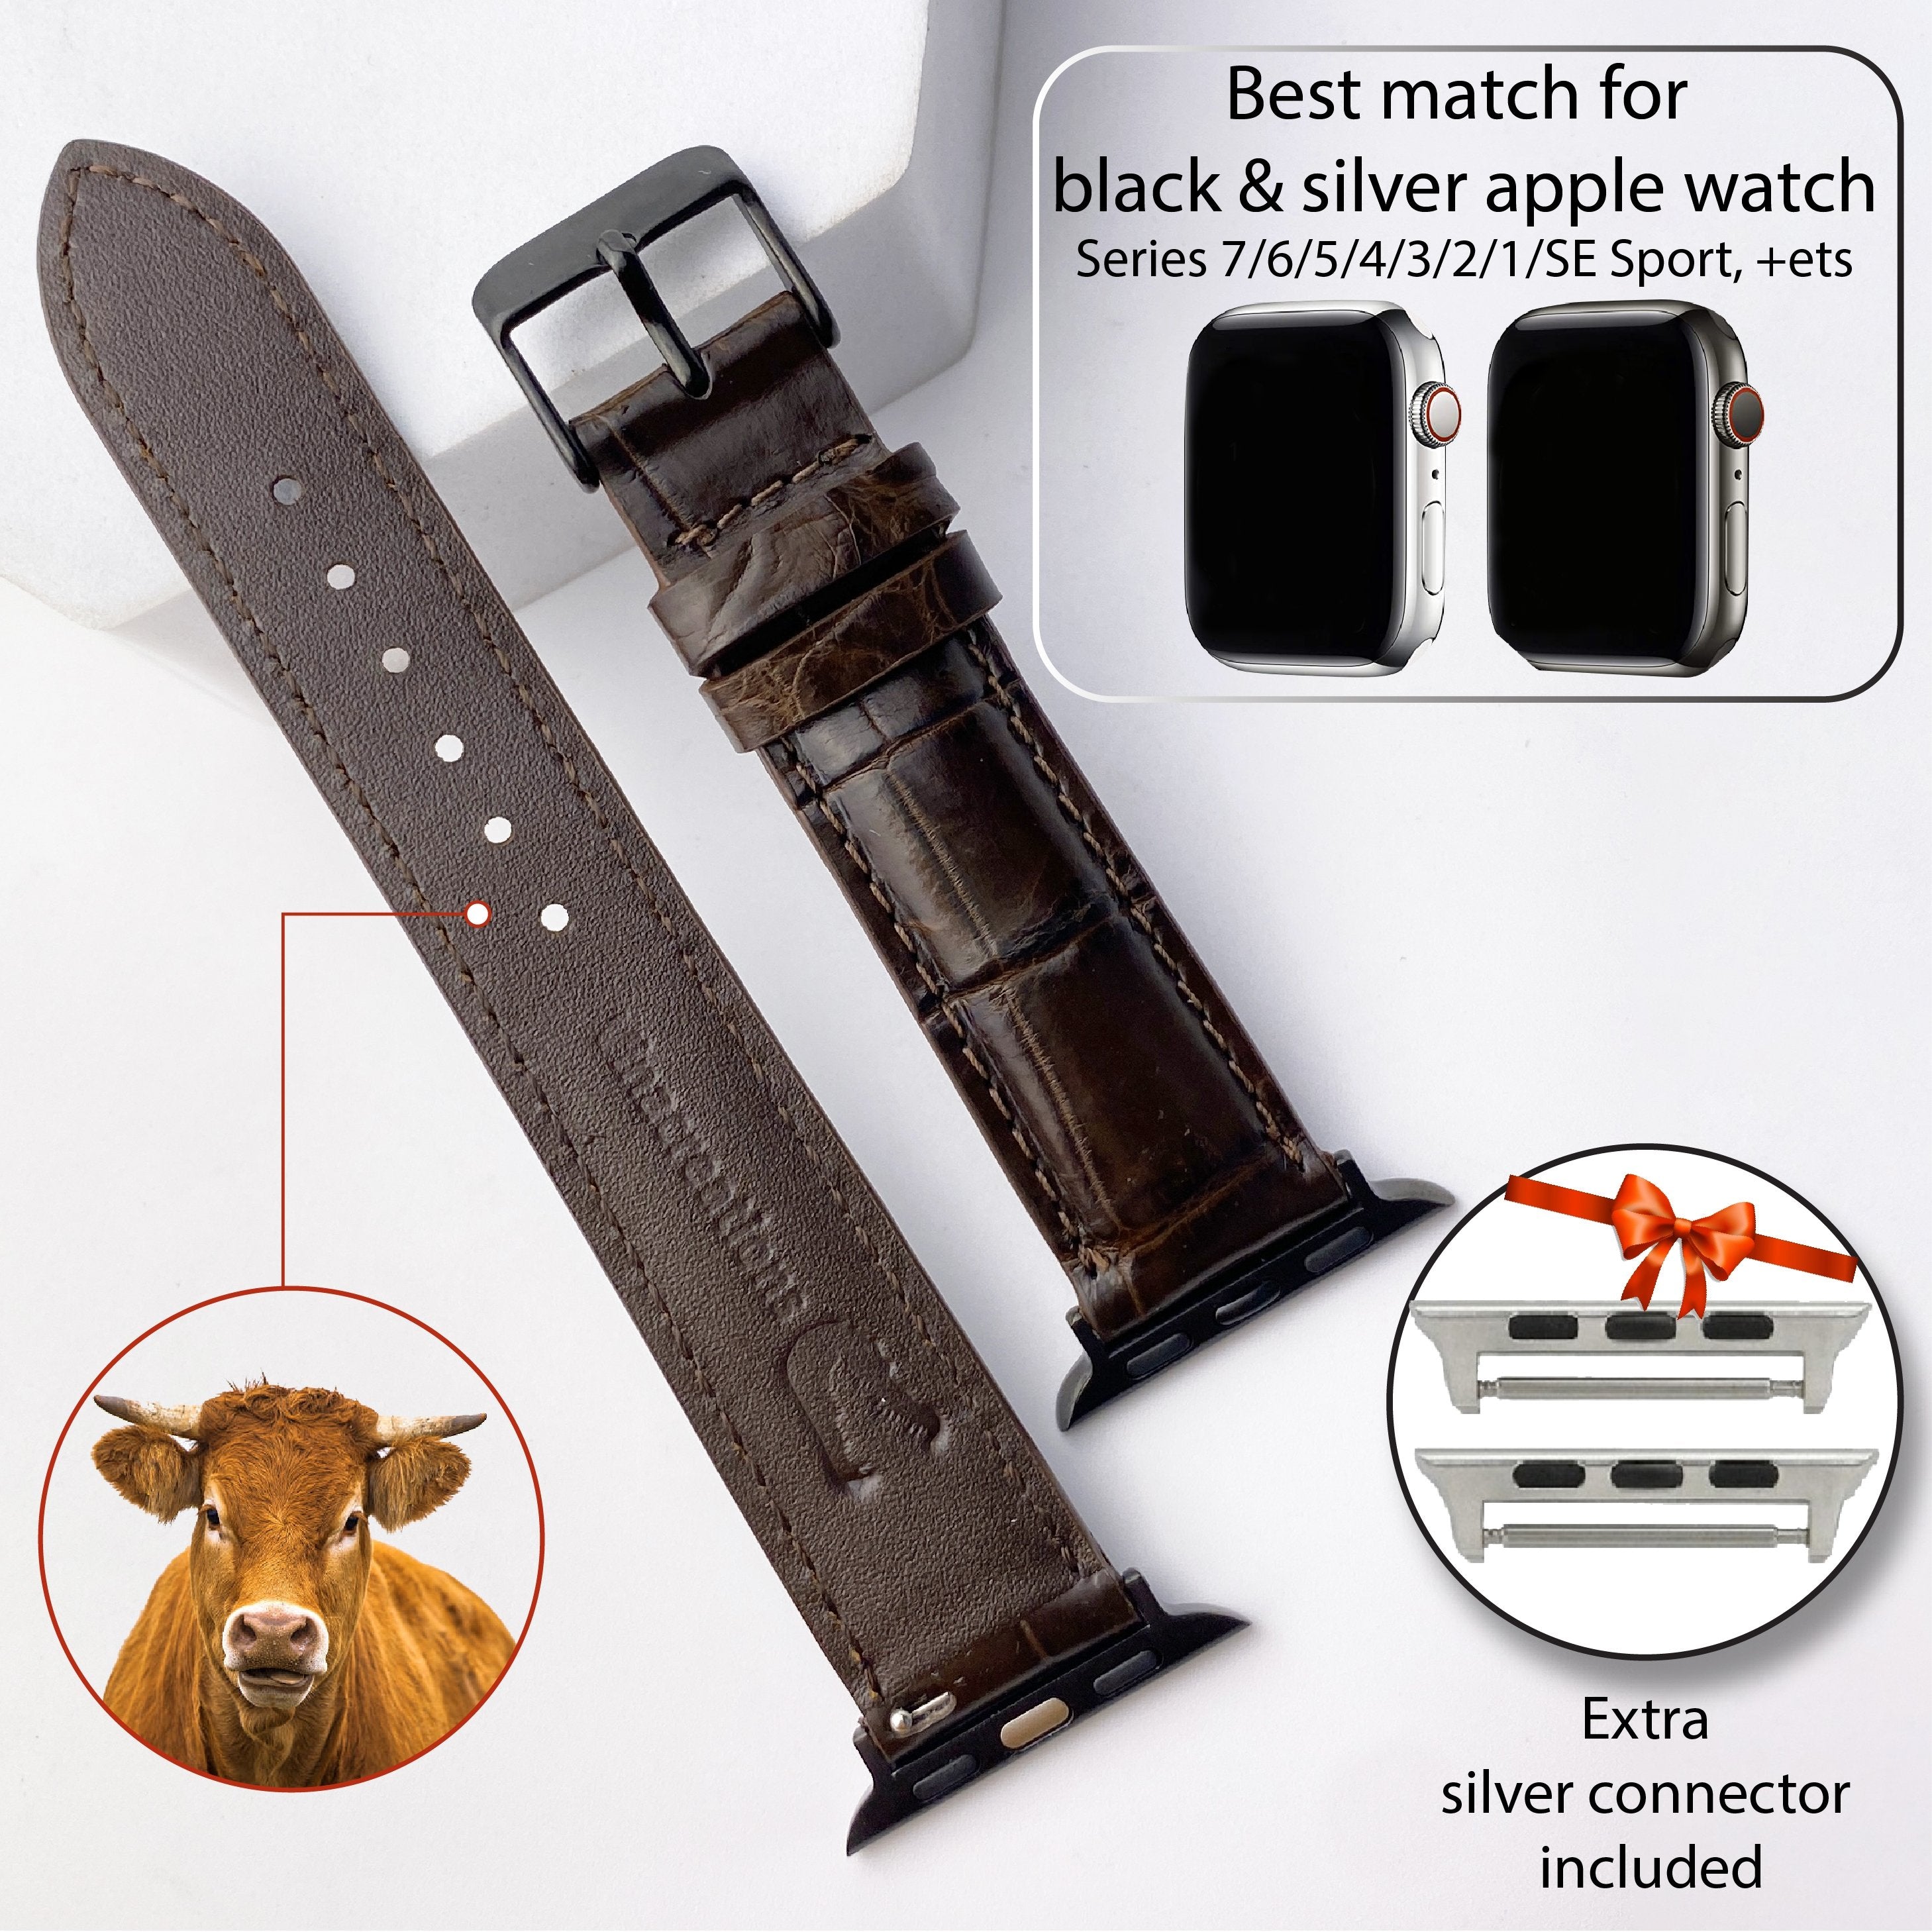 Dark Brown Alligator Leather Watch Band Compatible with Apple Watch IWatch Series 7 6 5 4 3 2 1 SE | AW-03 - Vinacreations